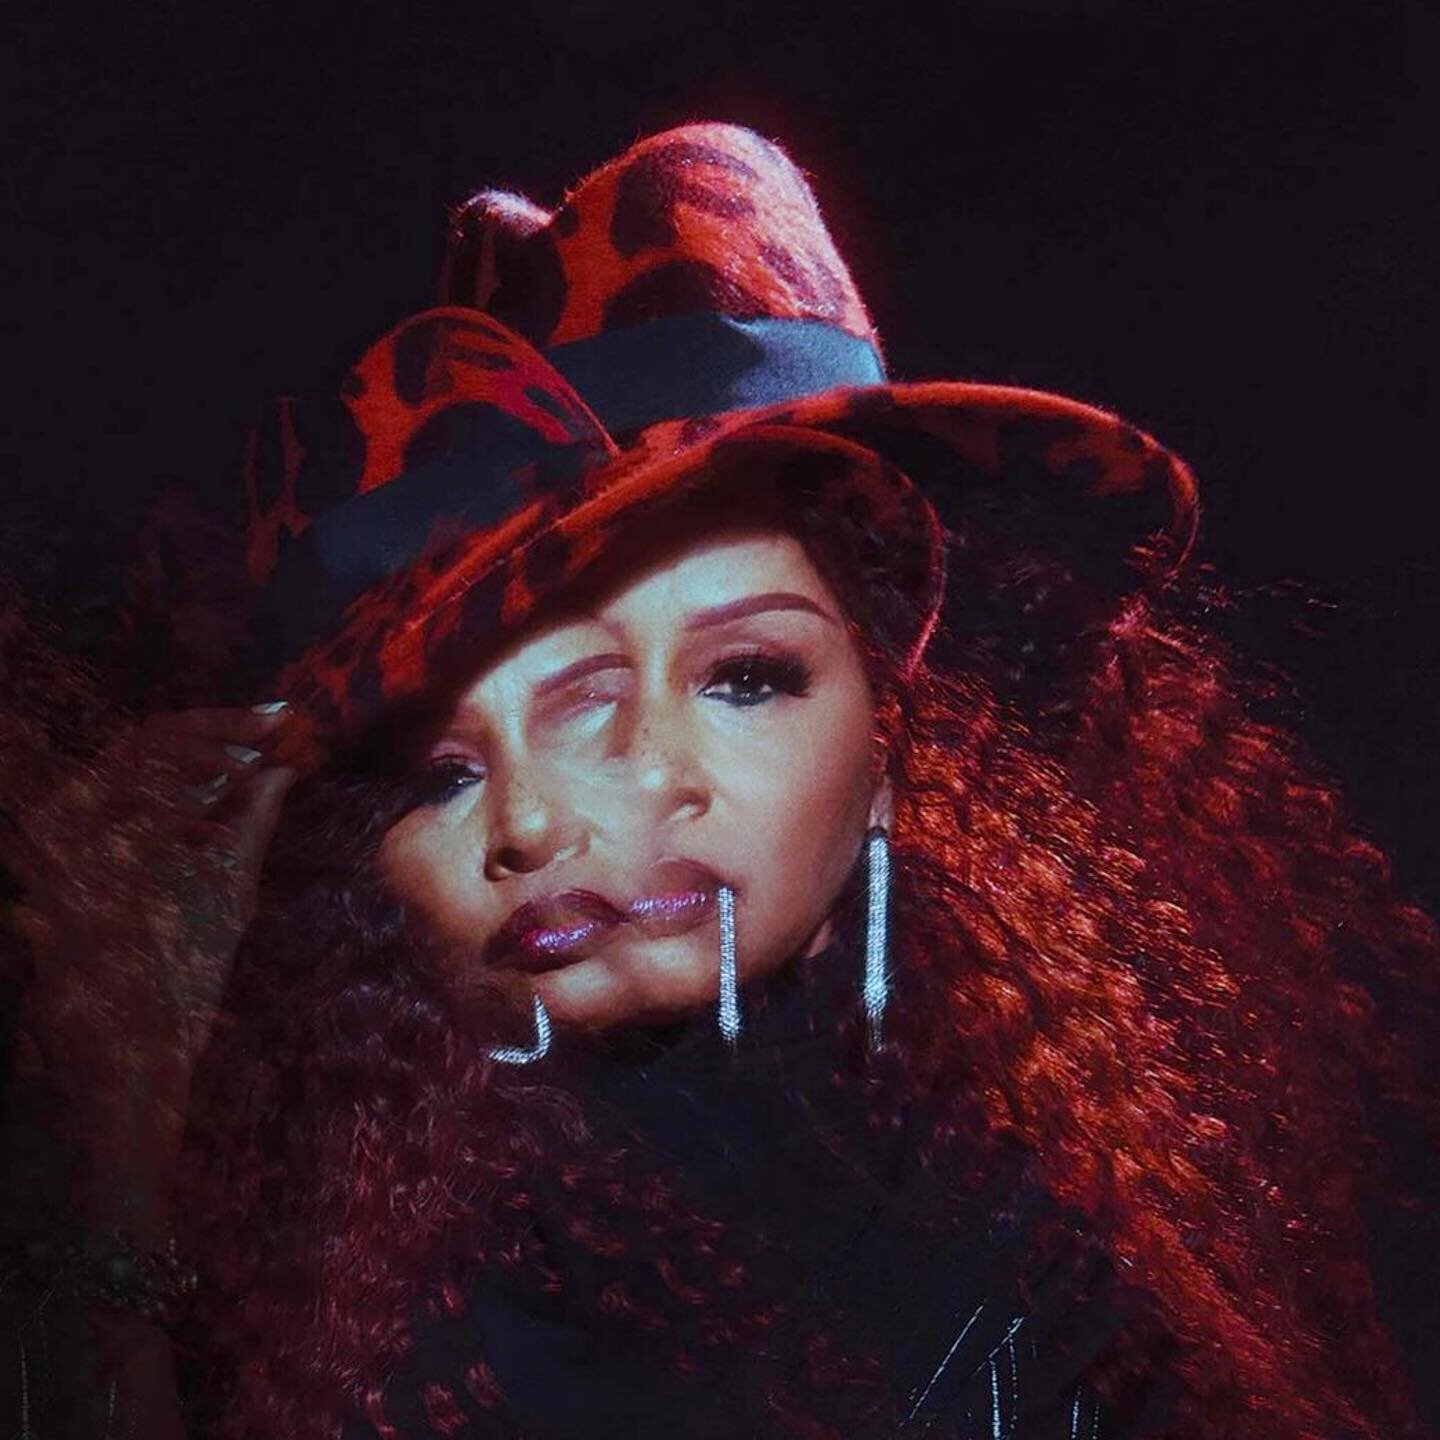 Queen @ChakaKhan wears #piersatkinson red and black fedora 💋
In conversation with @SiaMusic for Issue 191 of @flauntmagazine 

10-time @RecordingAcademy winner Chaka Khan emerges back to the spotlight this year with her goddaughter, Australian singe